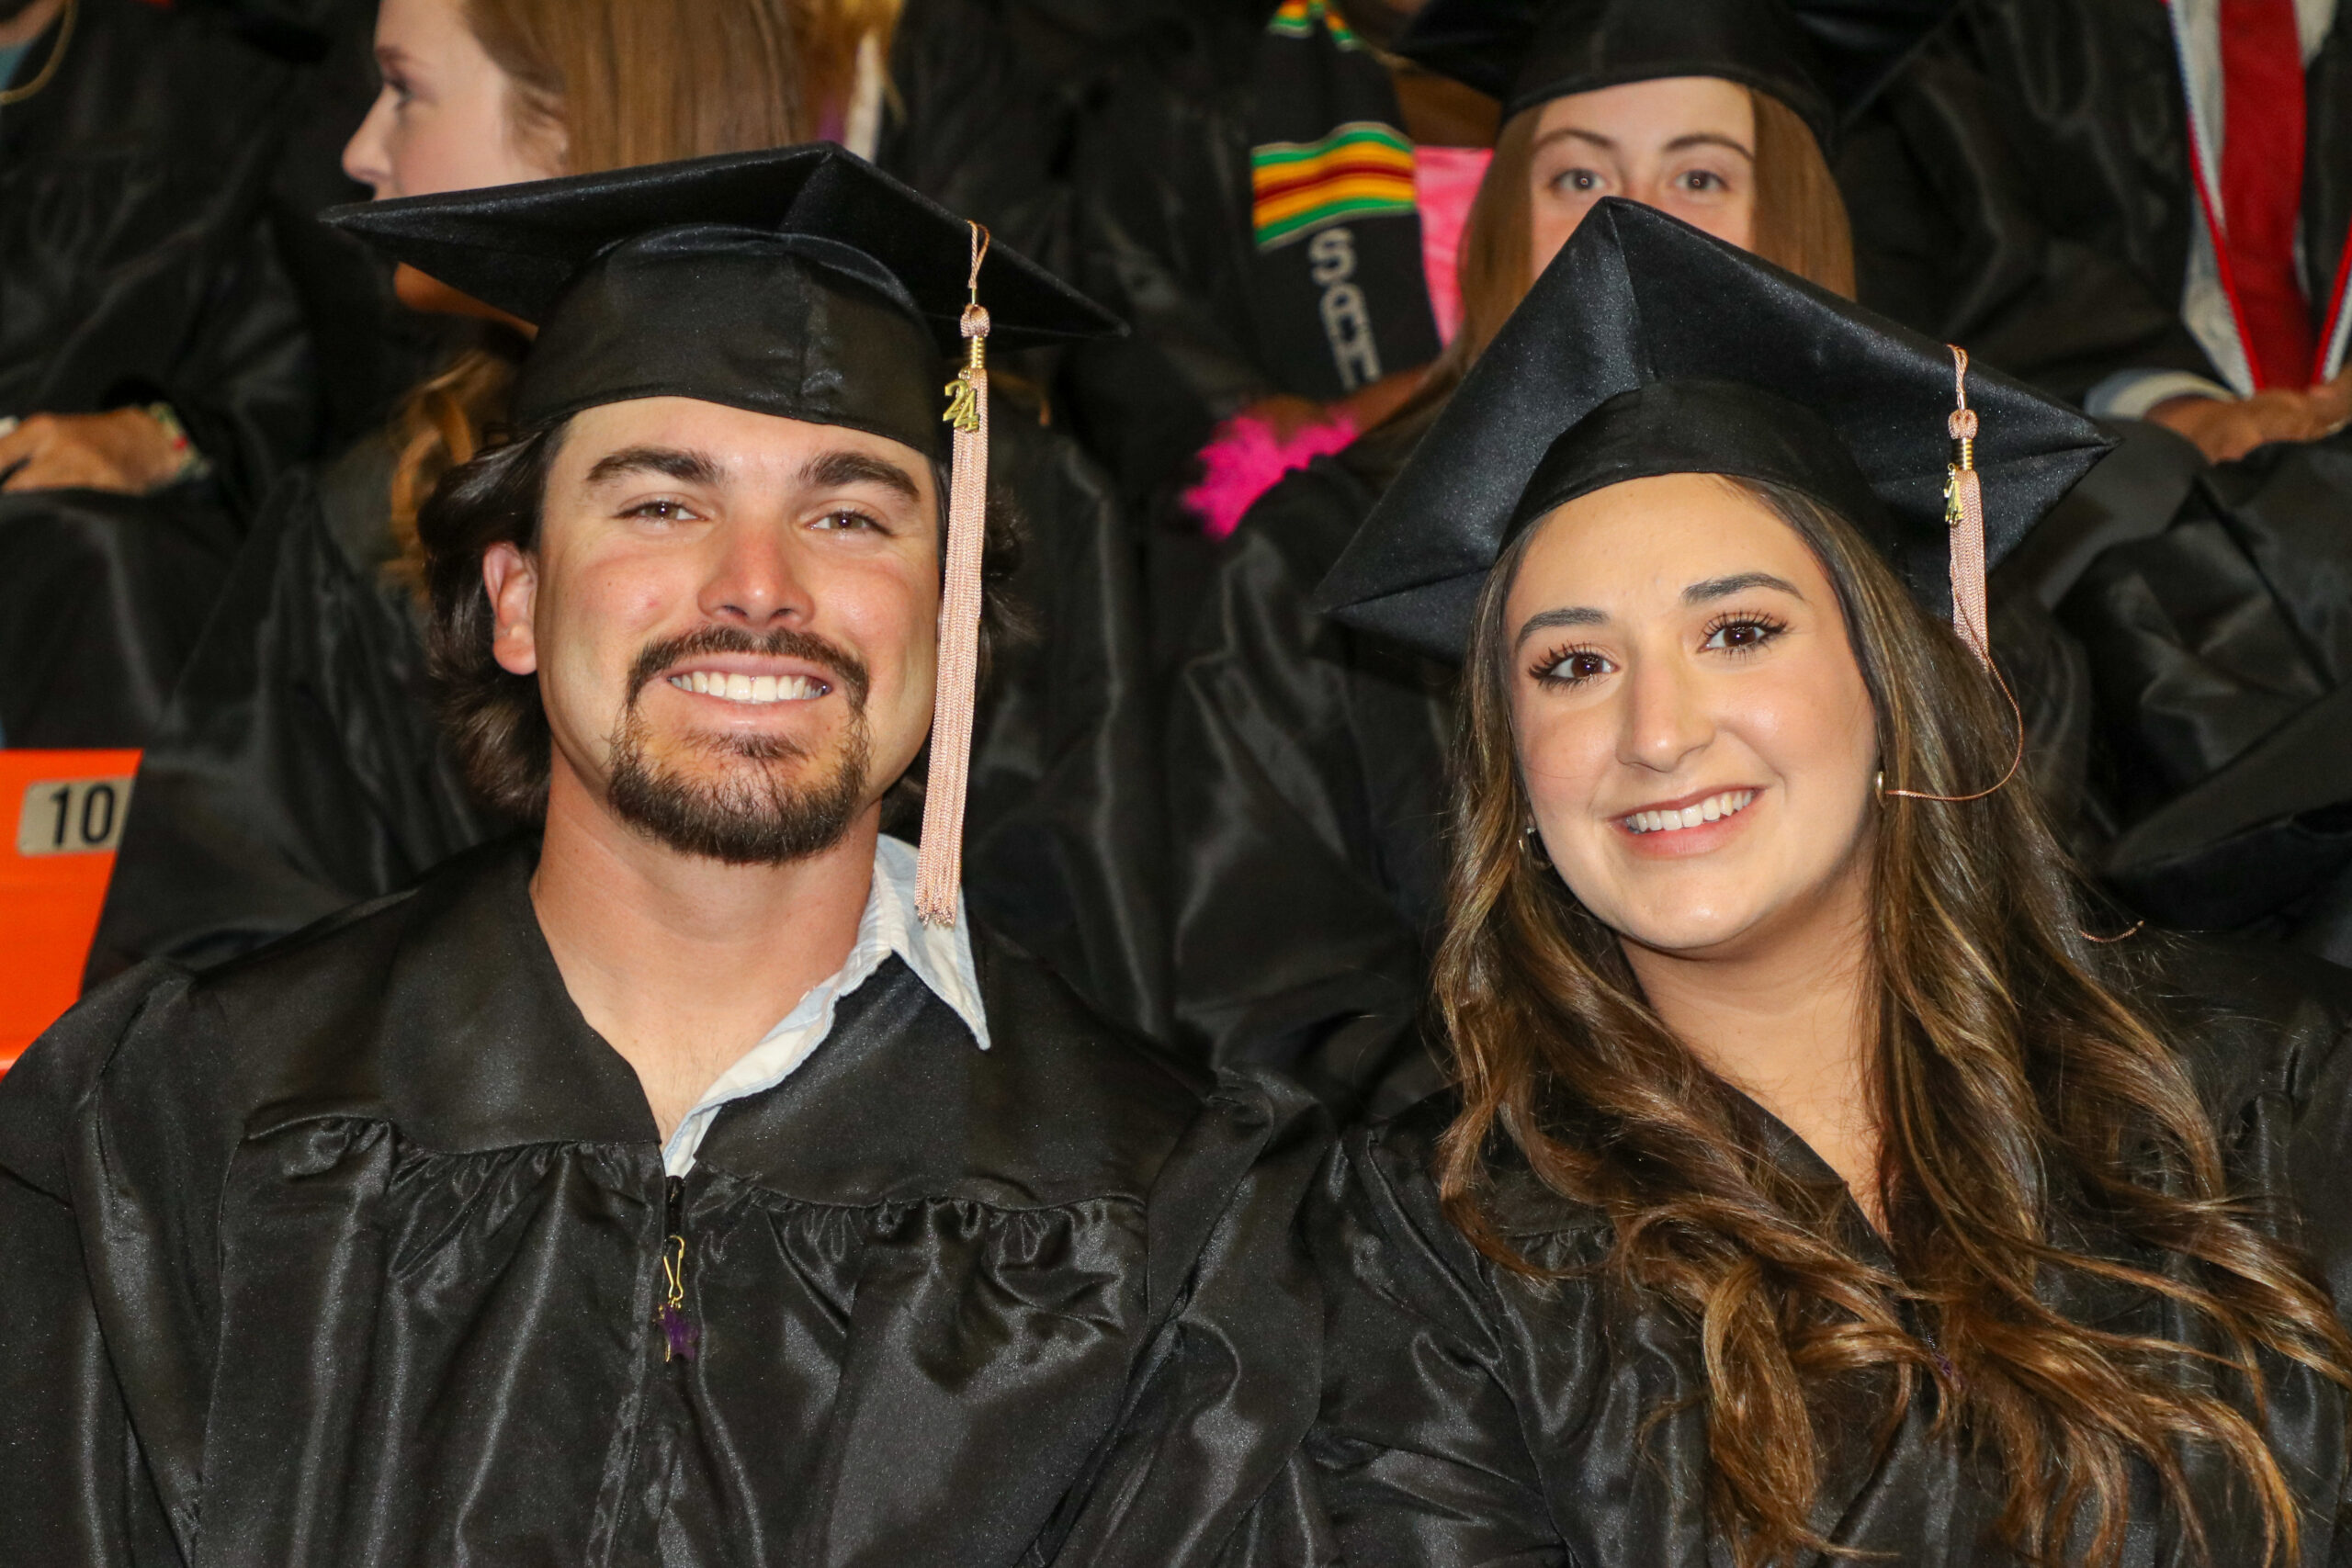 Man and woman sitting side by side in graduation attire